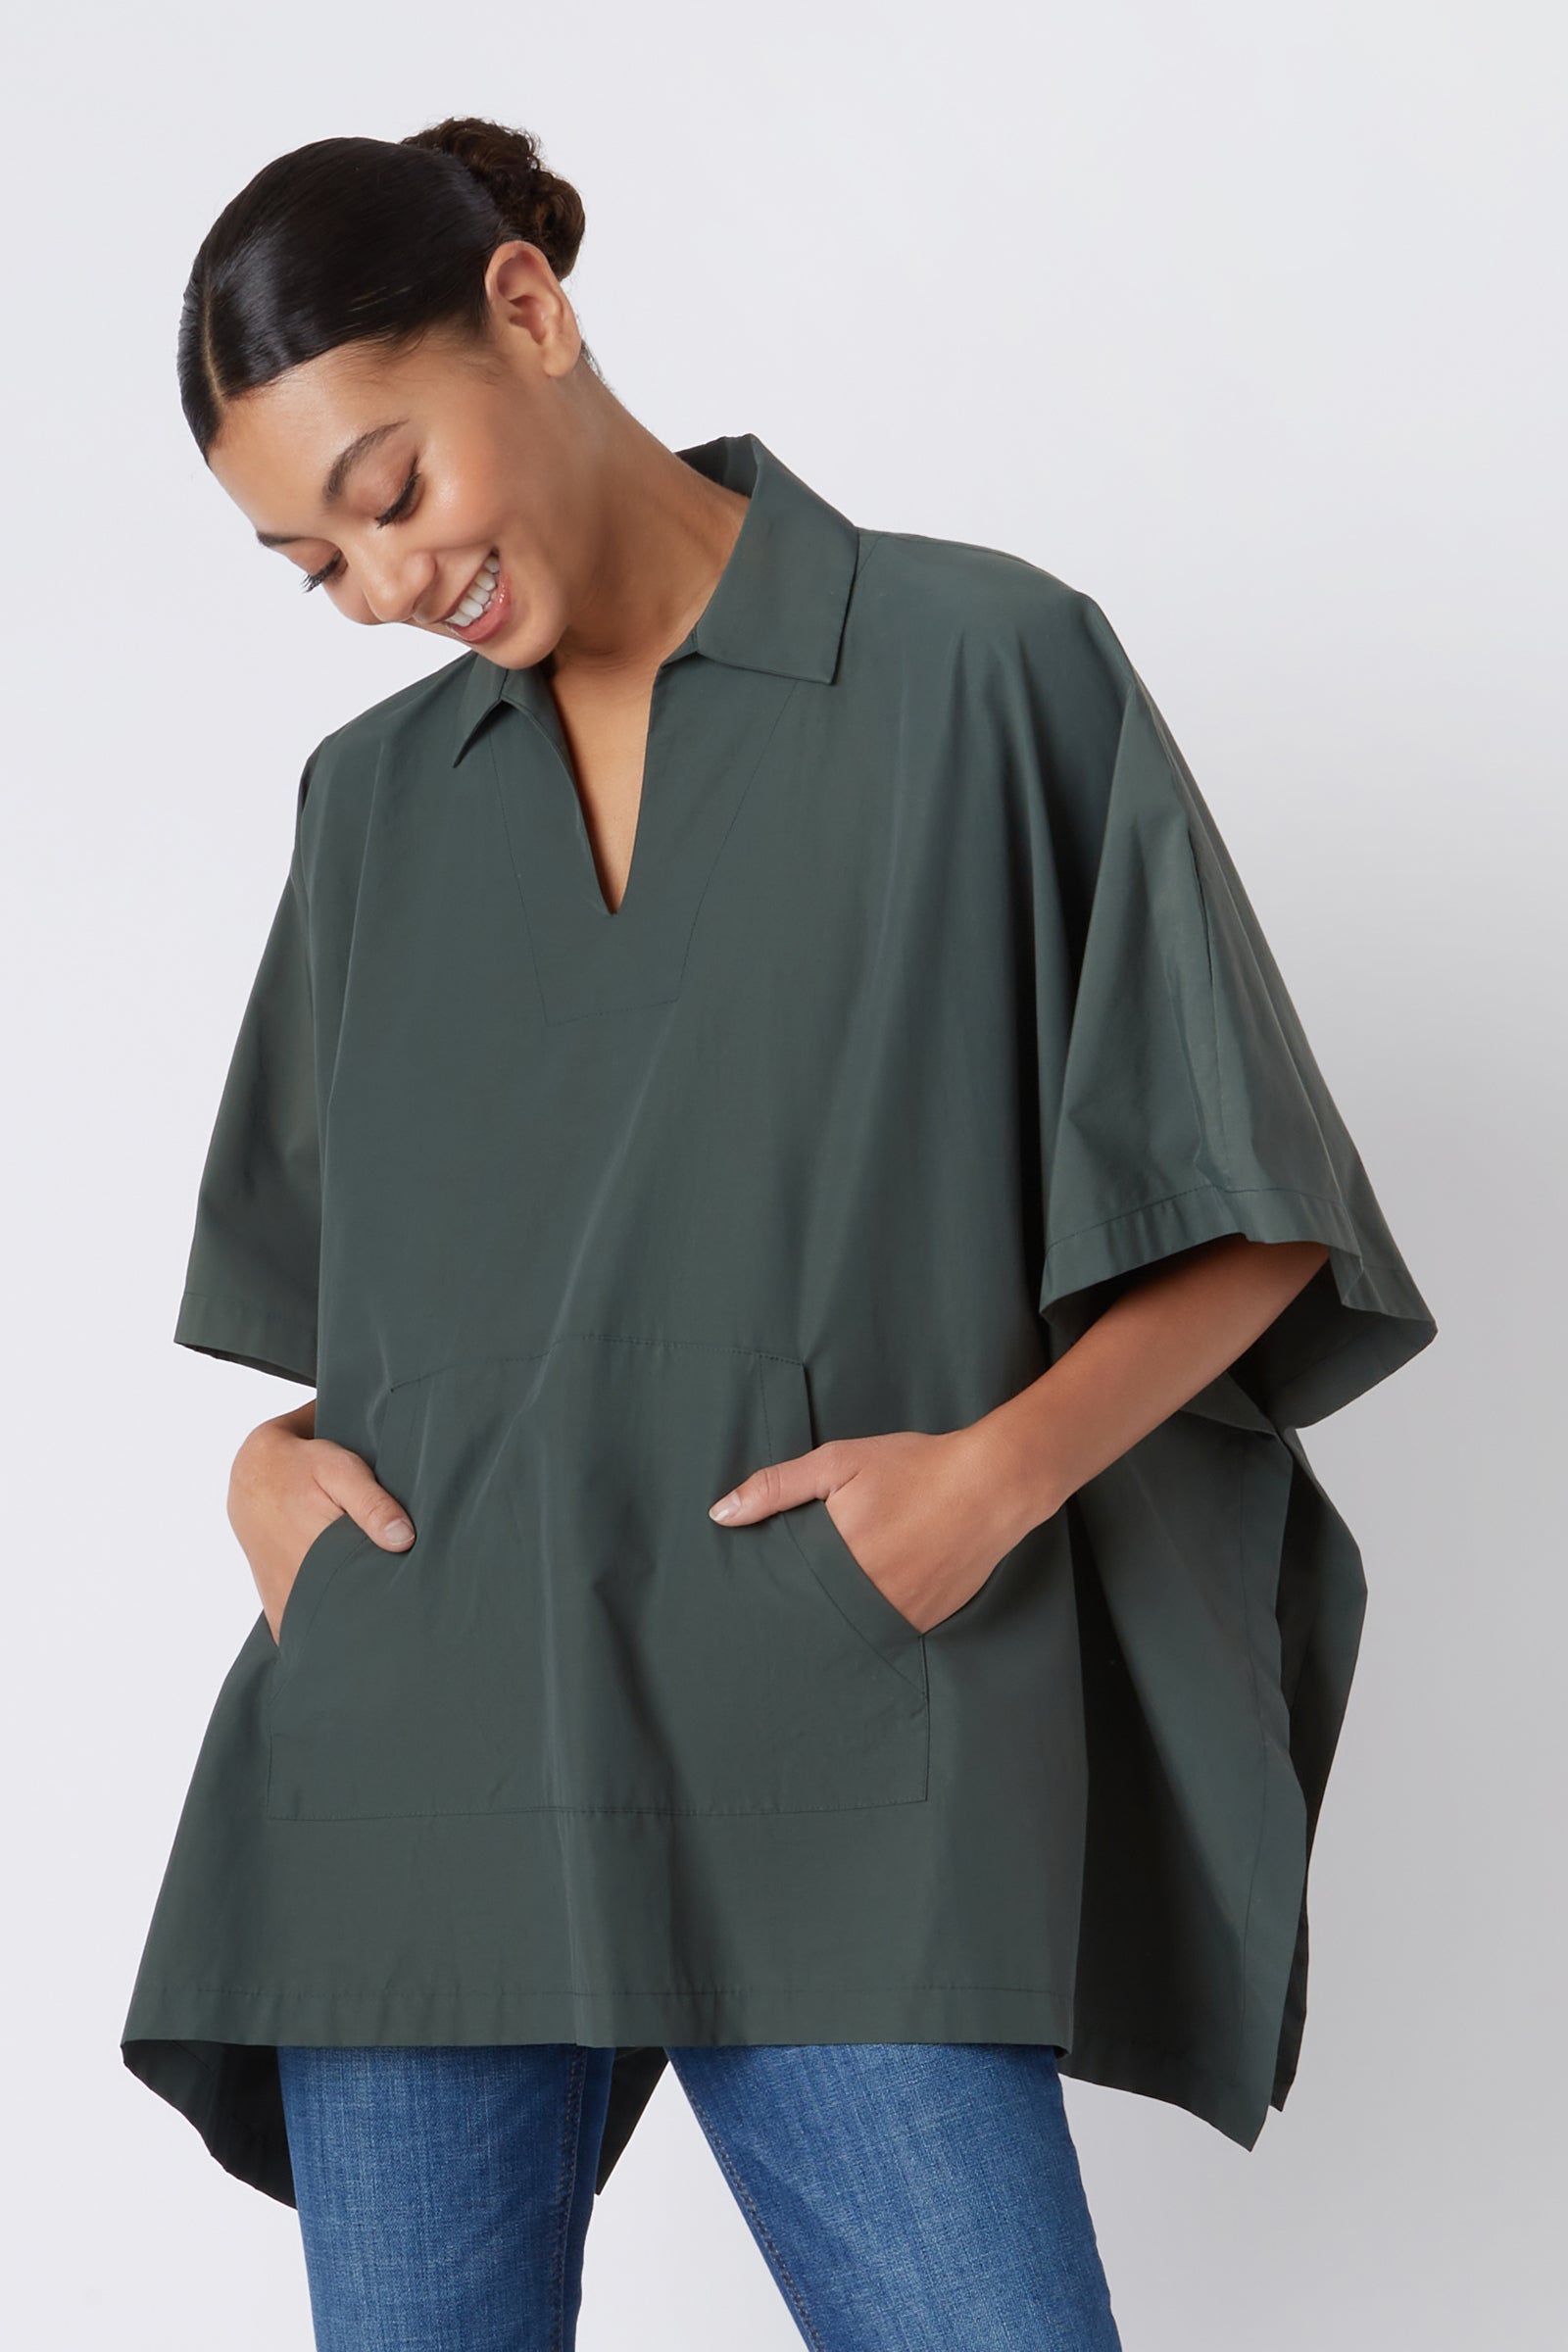 Kal Rieman Pocket Poncho in Loden on Model Looking Down Cropped Front View